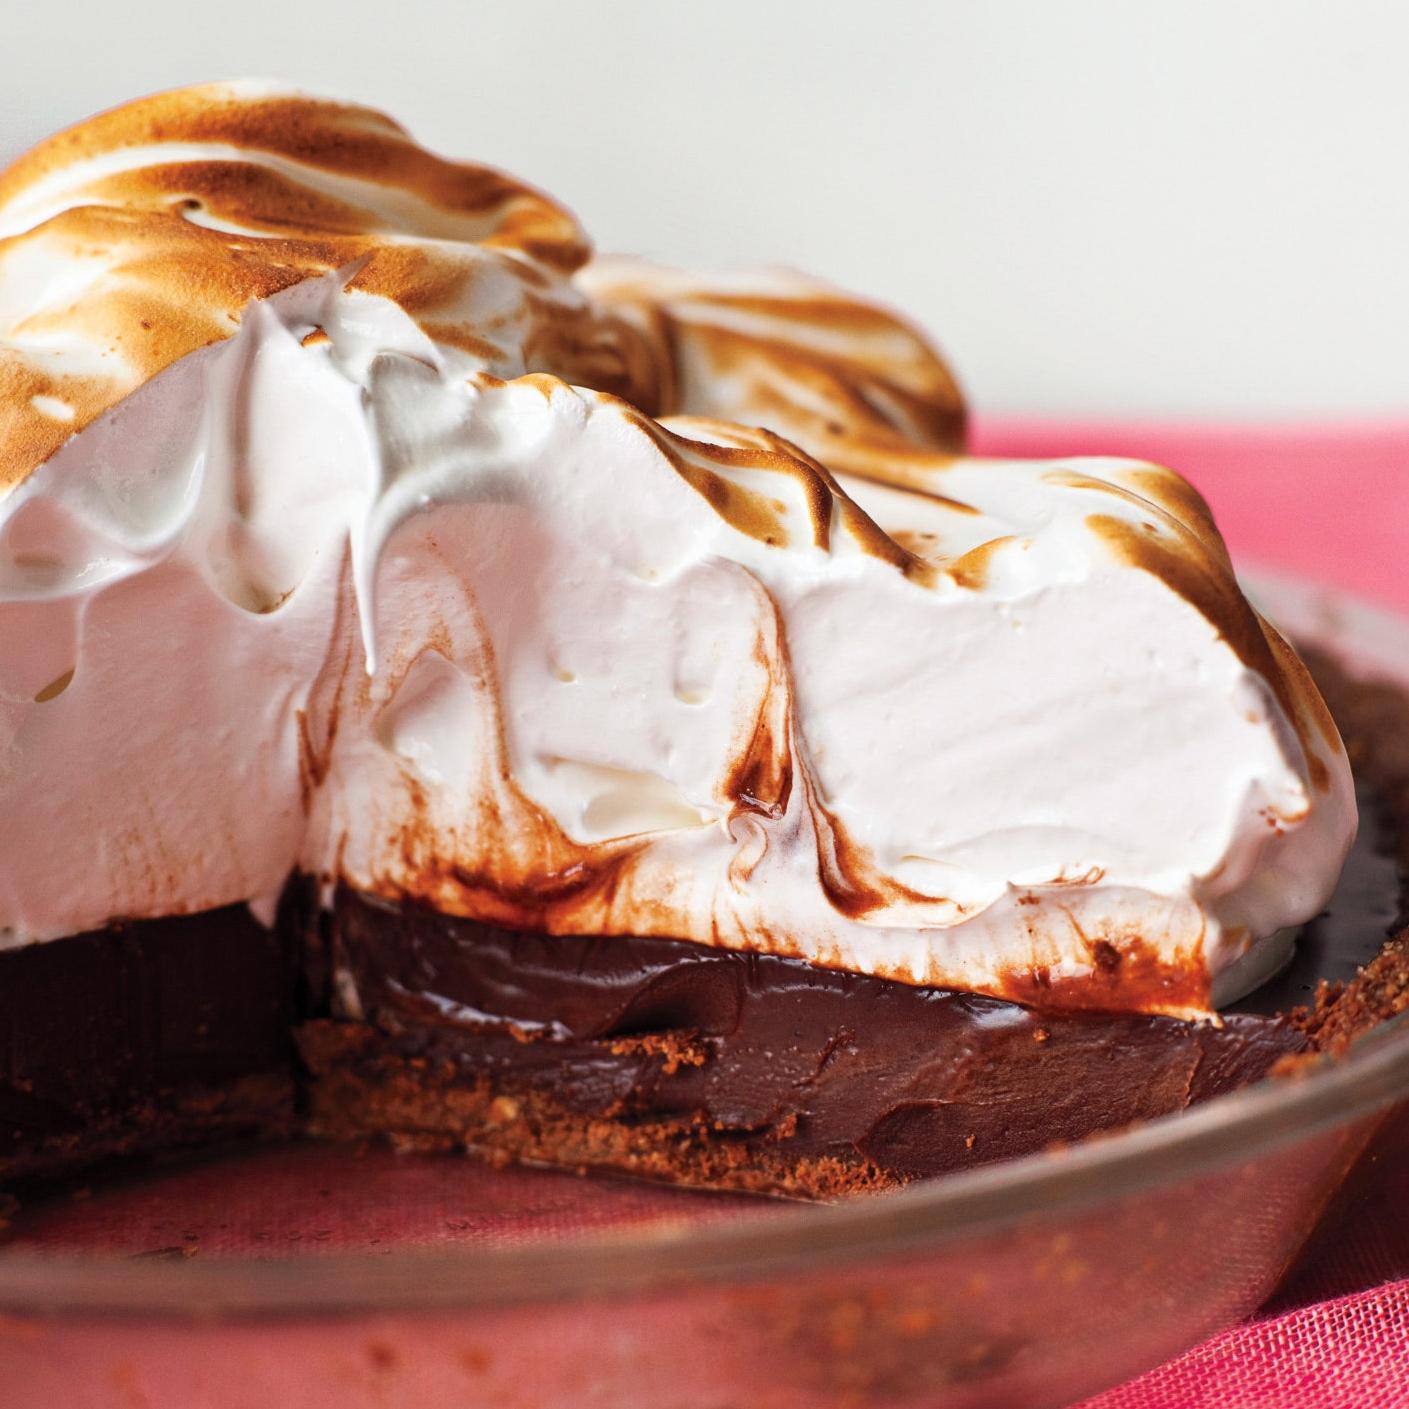  Satisfy your sweet tooth and caffeine craving with one delicious pie